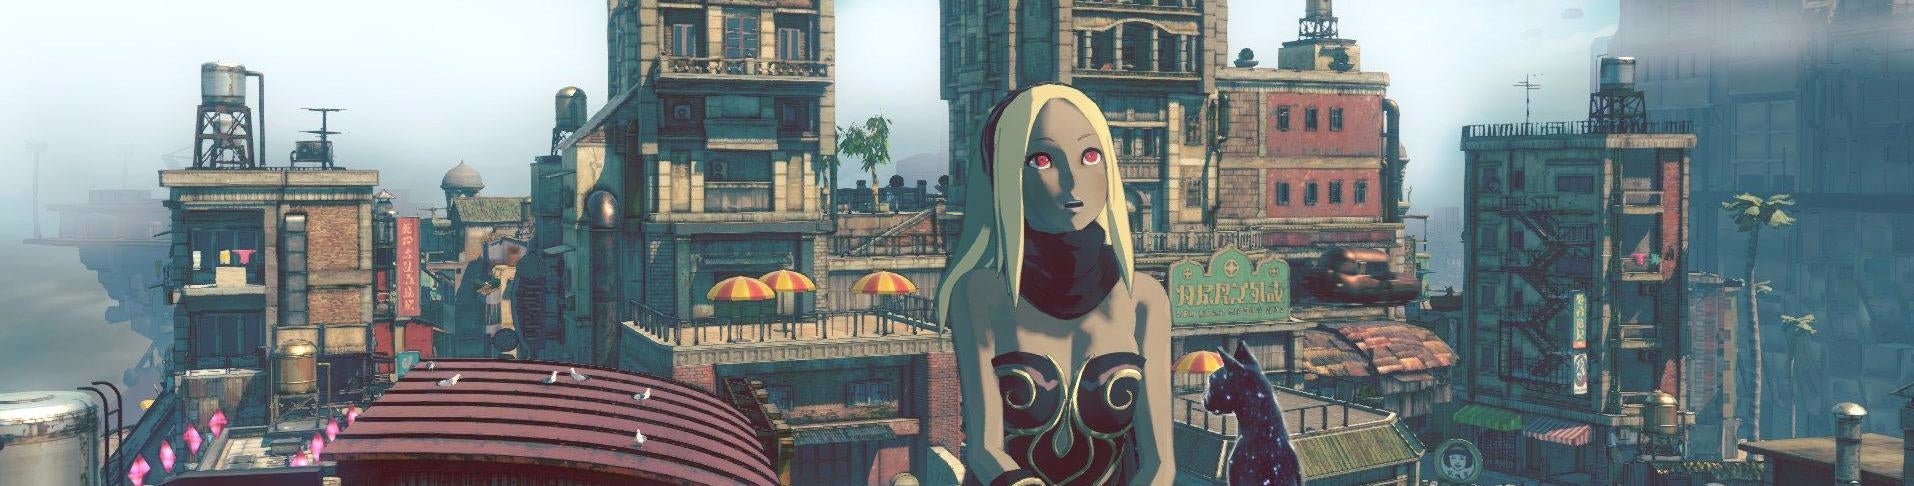 Image for Watch: Ian plays 90 minutes of Gravity Rush 2, forgets which way is up